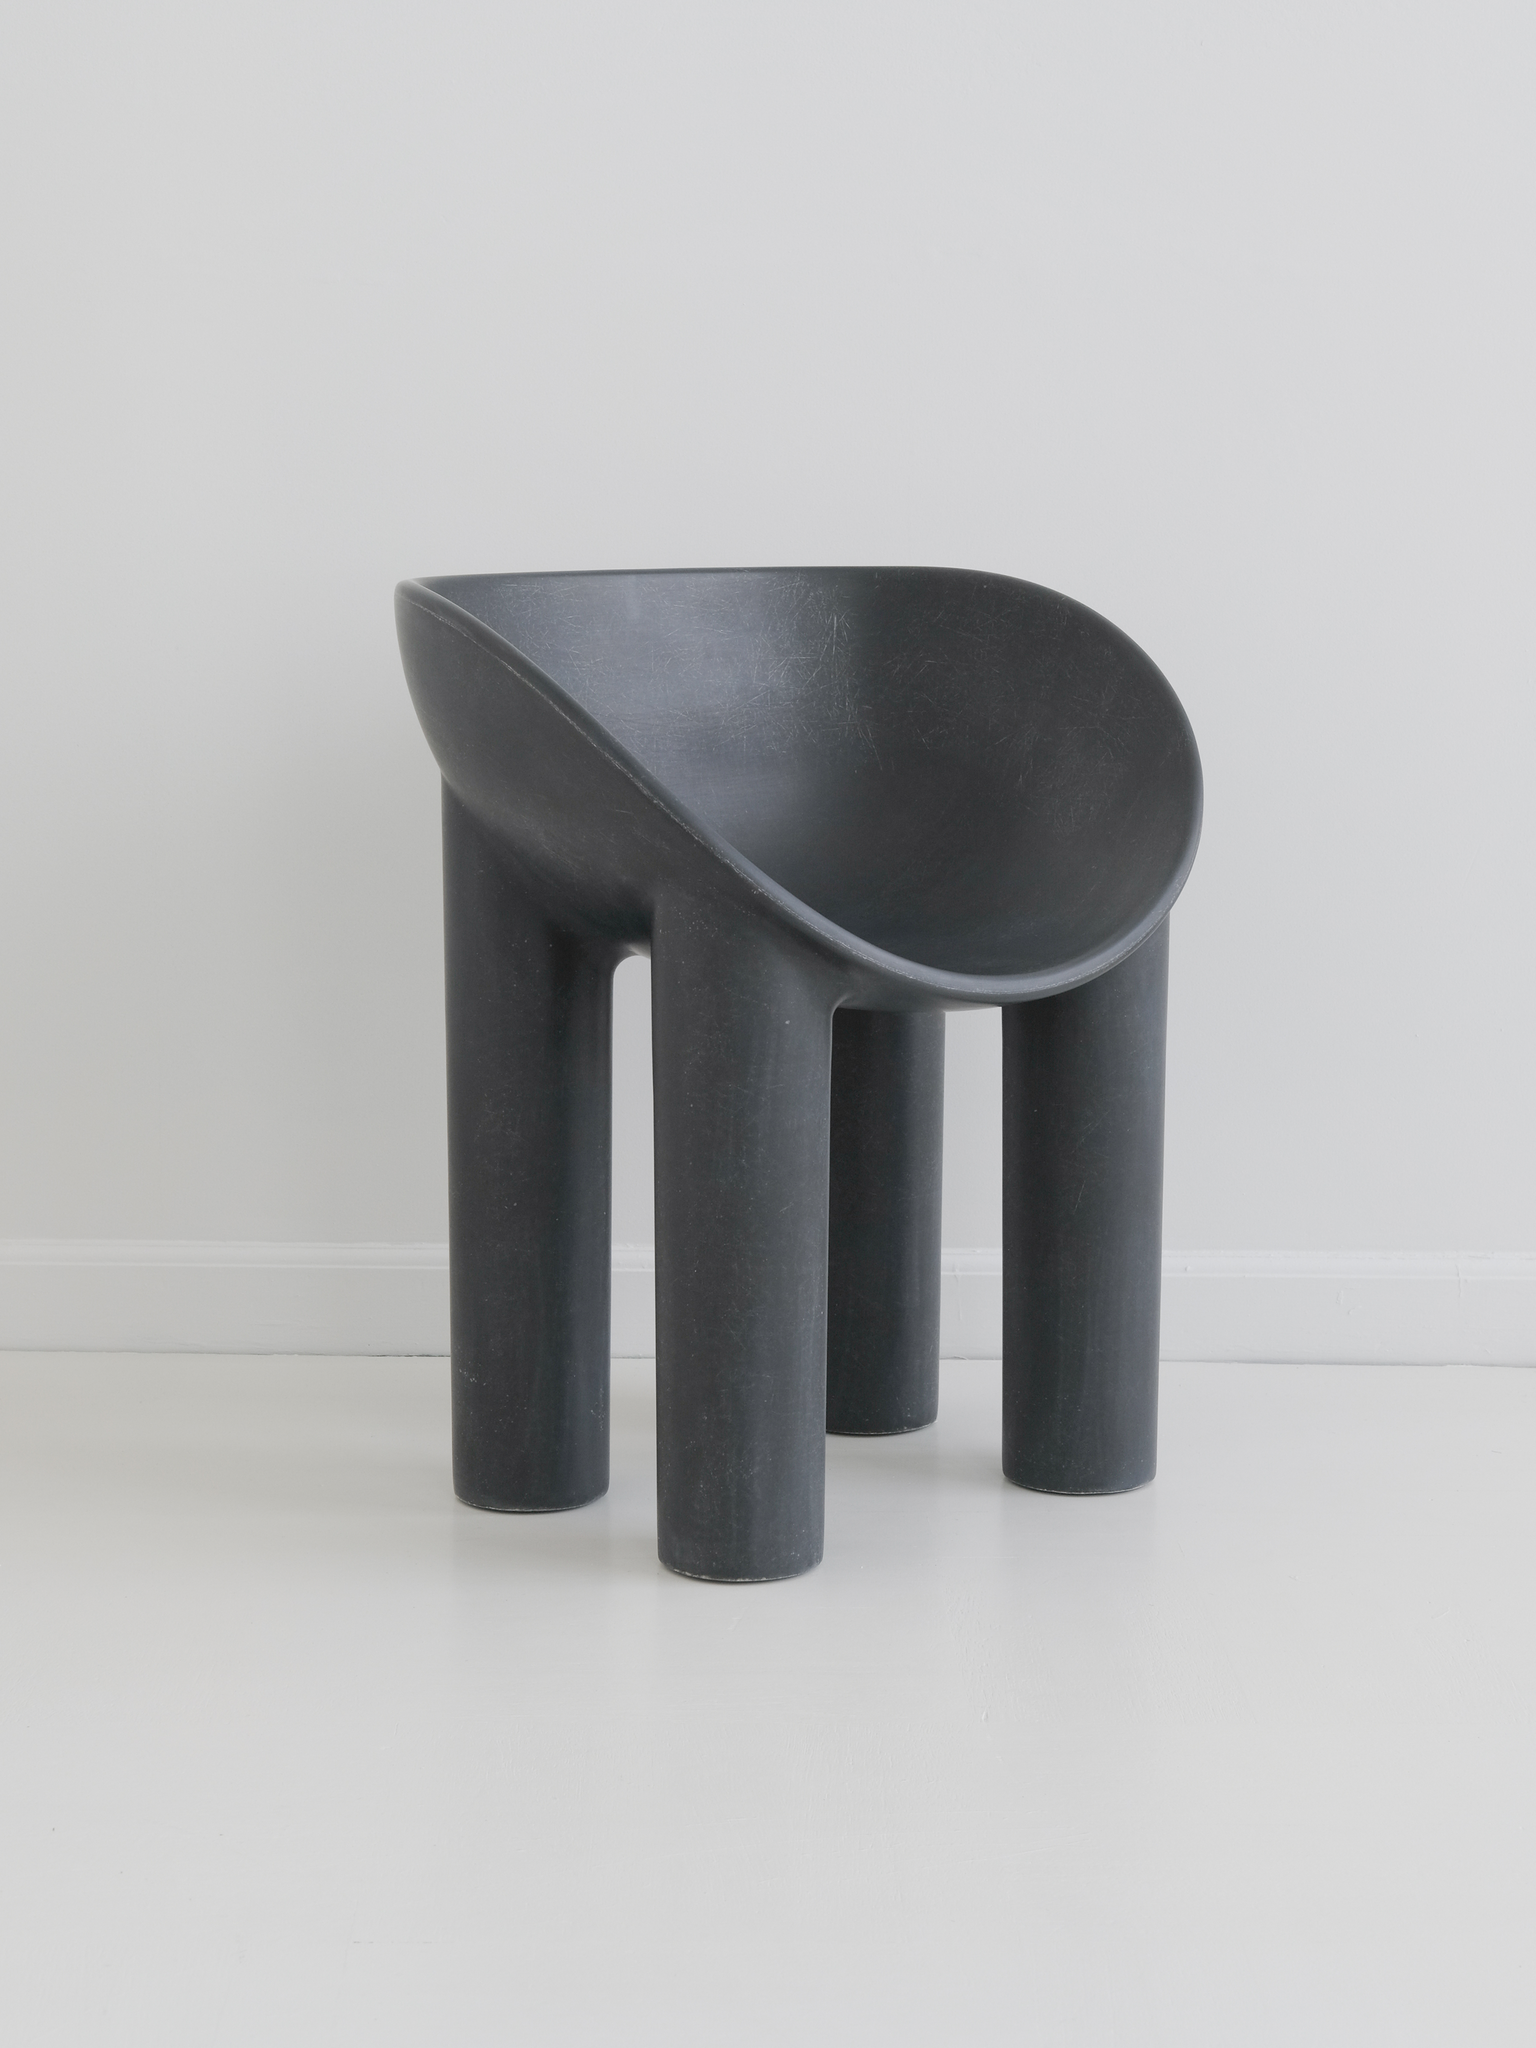 Faye Toogood Roly Poly Chair - Rue Verte